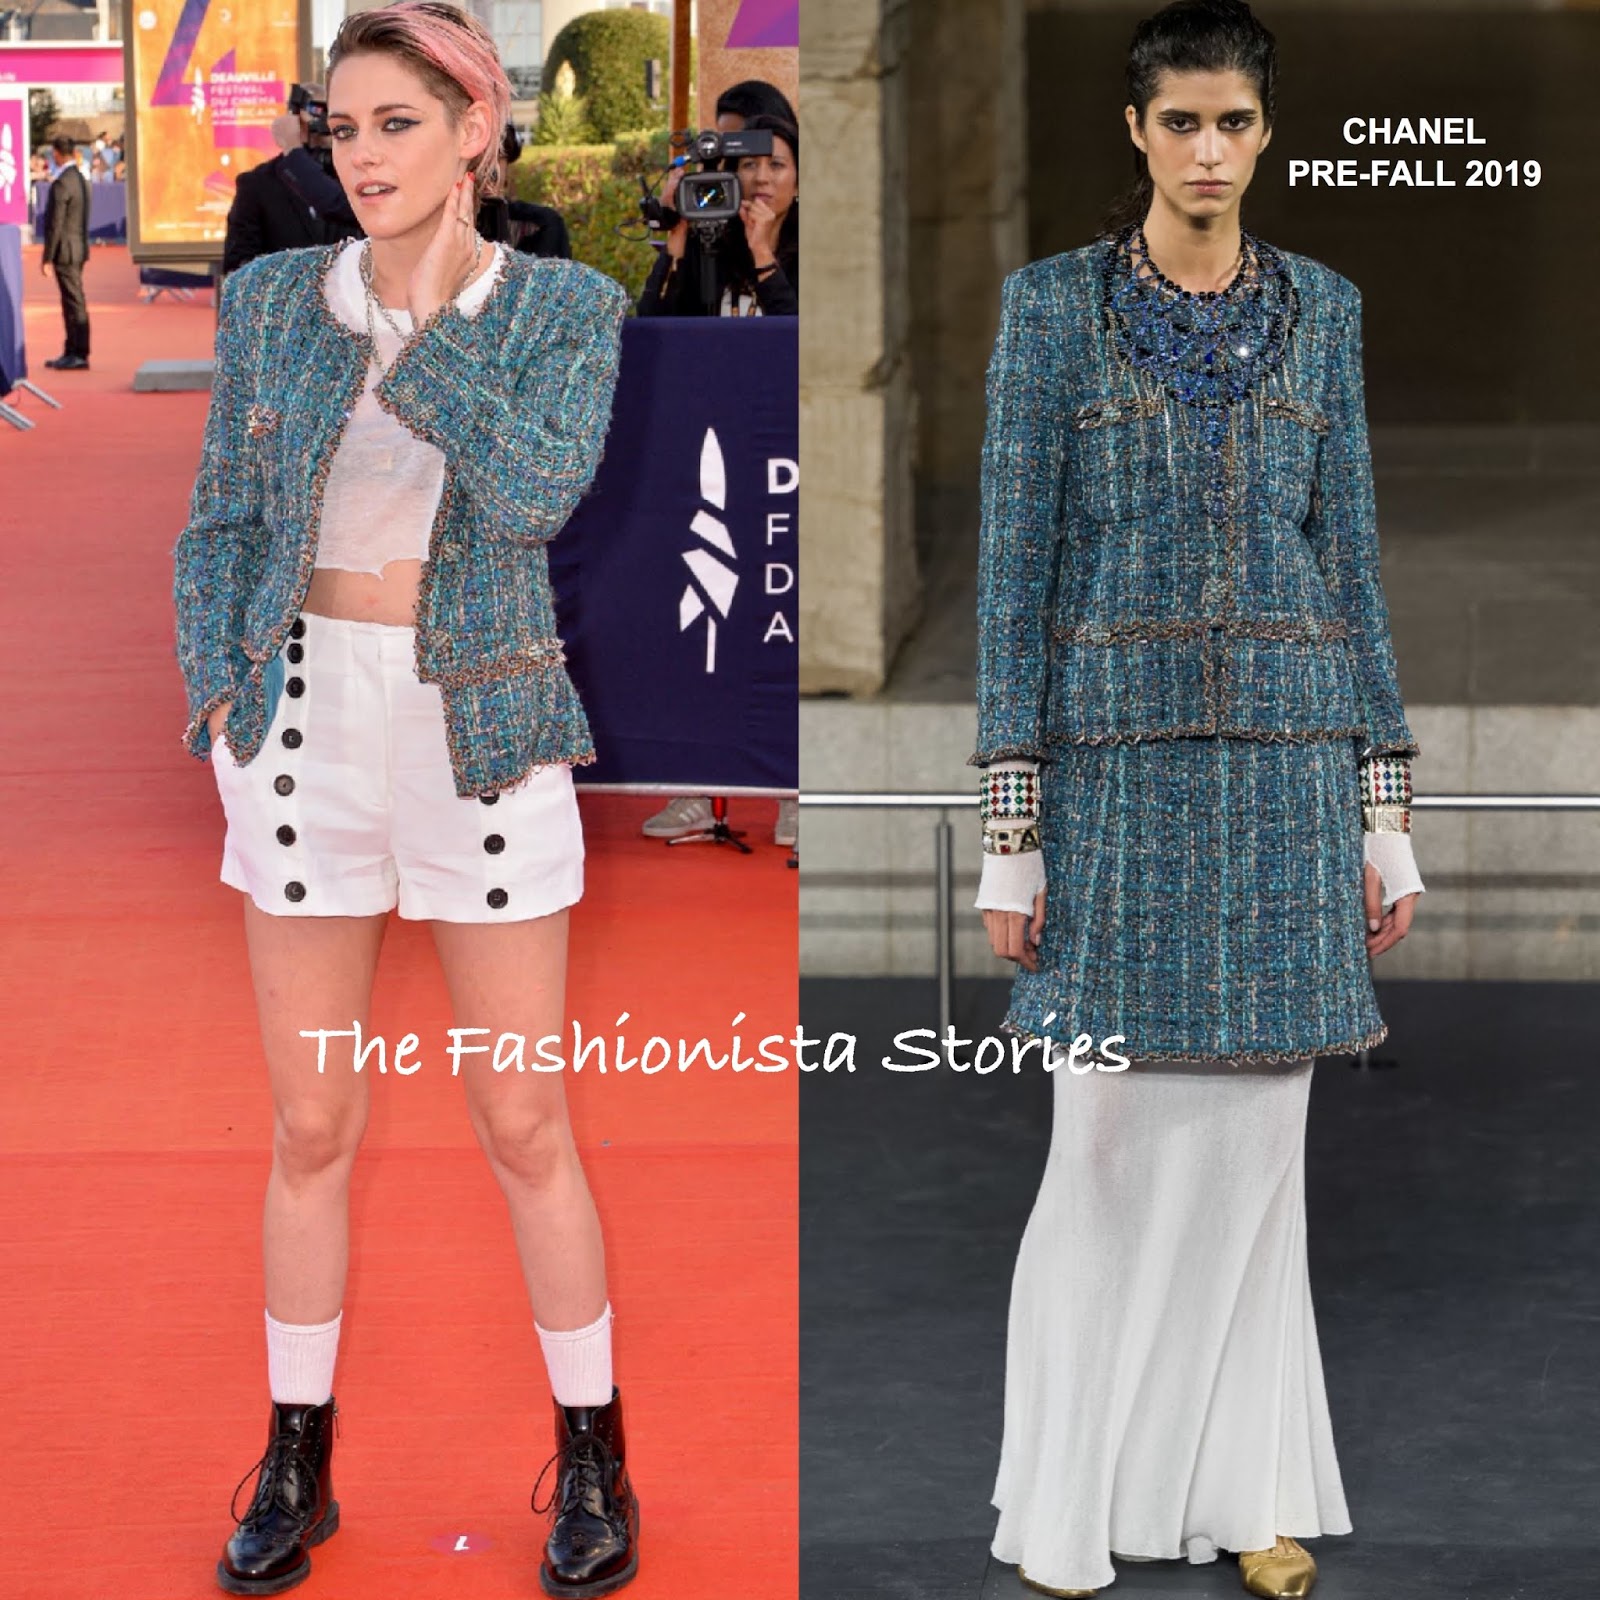 Kristen Stewart in Chanel at the 45th Deauville American Film